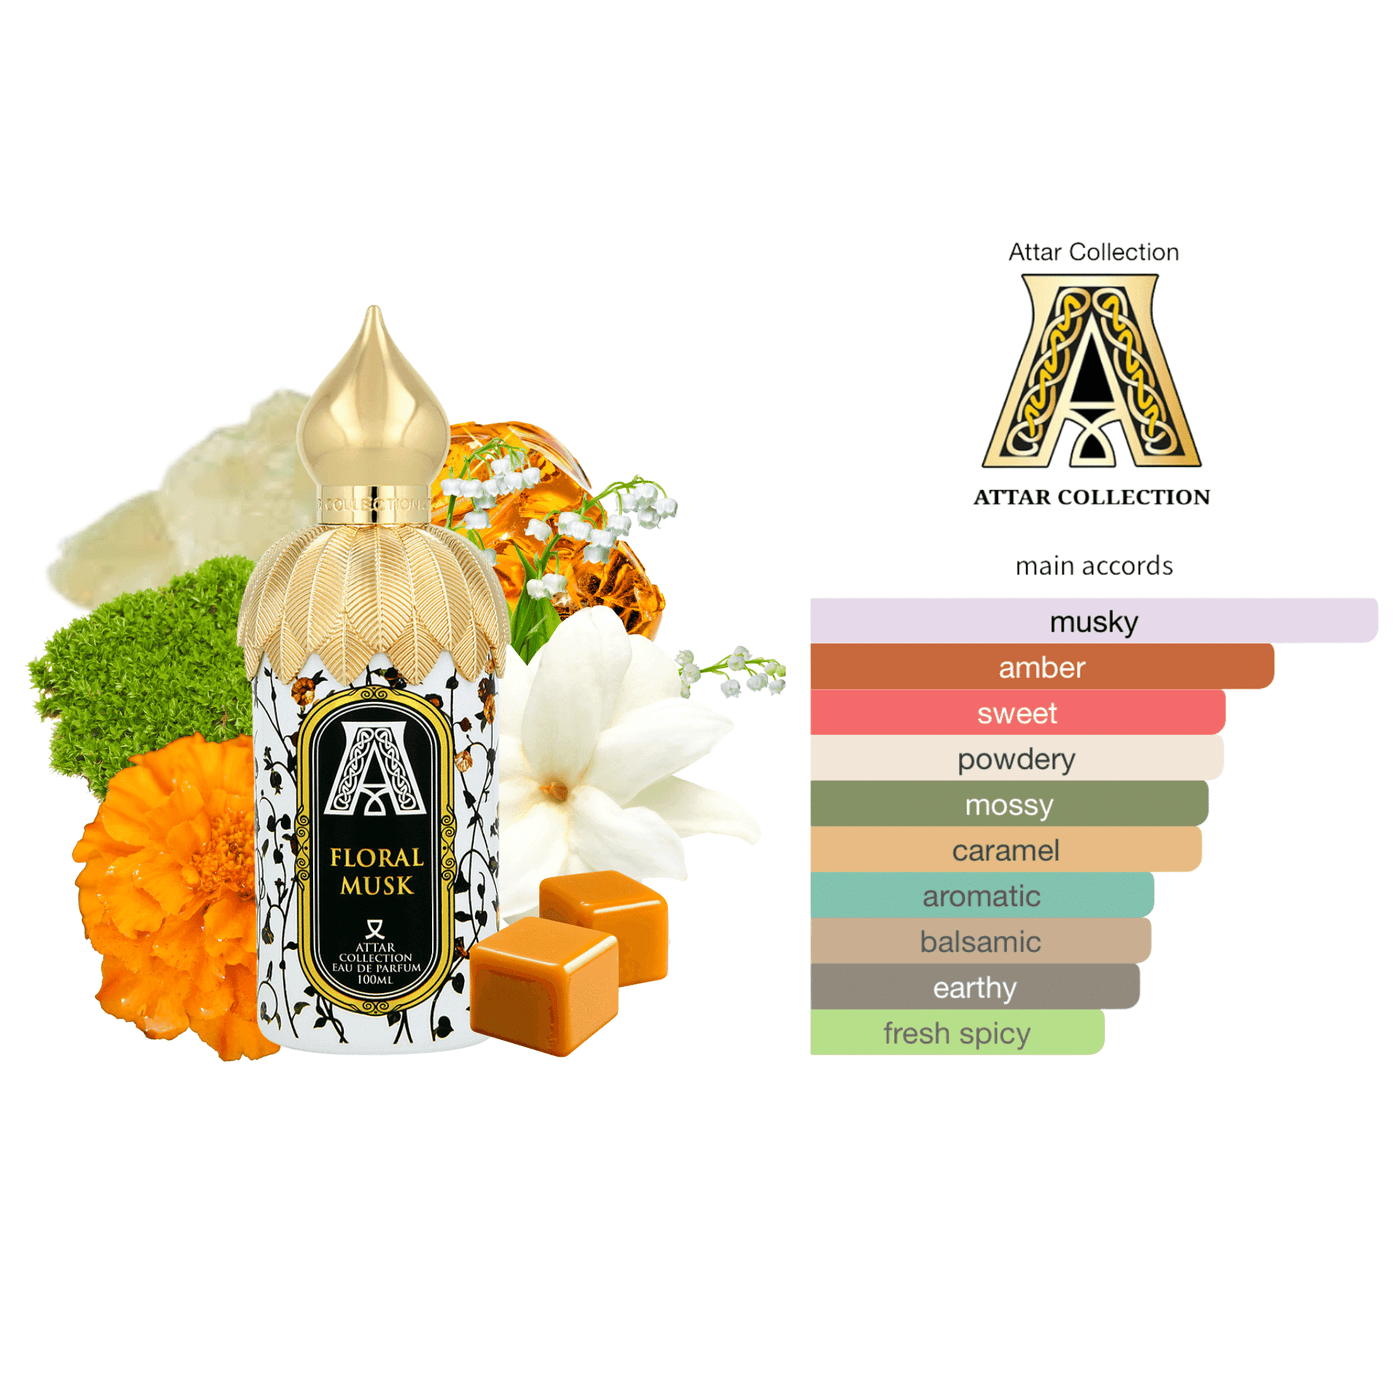 Floral Musk Attar collection perfume